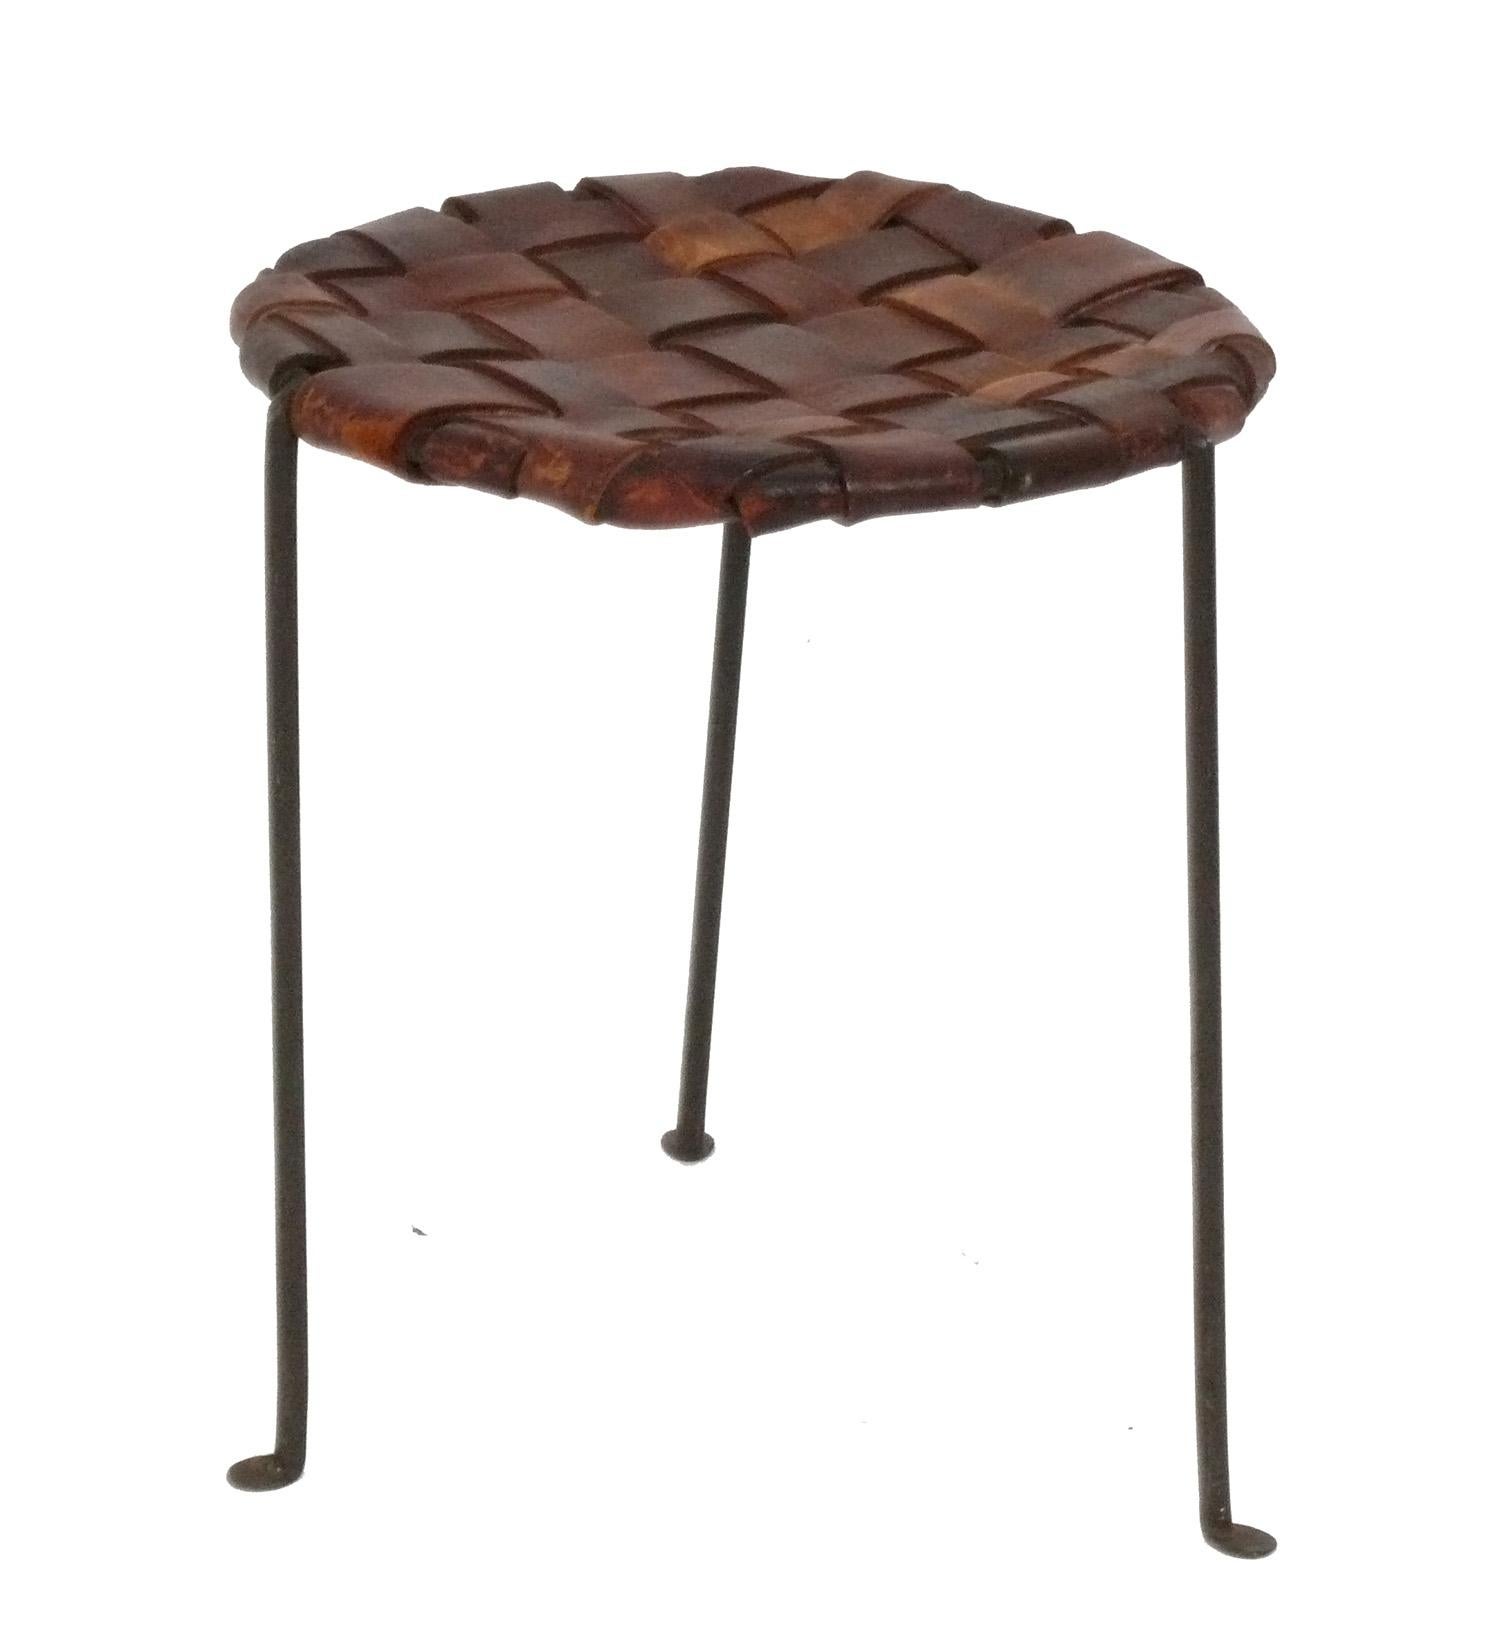 Studio Craft Woven Leather and Iron Stool, hand made by Lila Swift and Donald Monell, American, circa 1950s. The beautiful combination of the original patinated woven leather and the iron lend texture and warmth to any interior. The leather has been